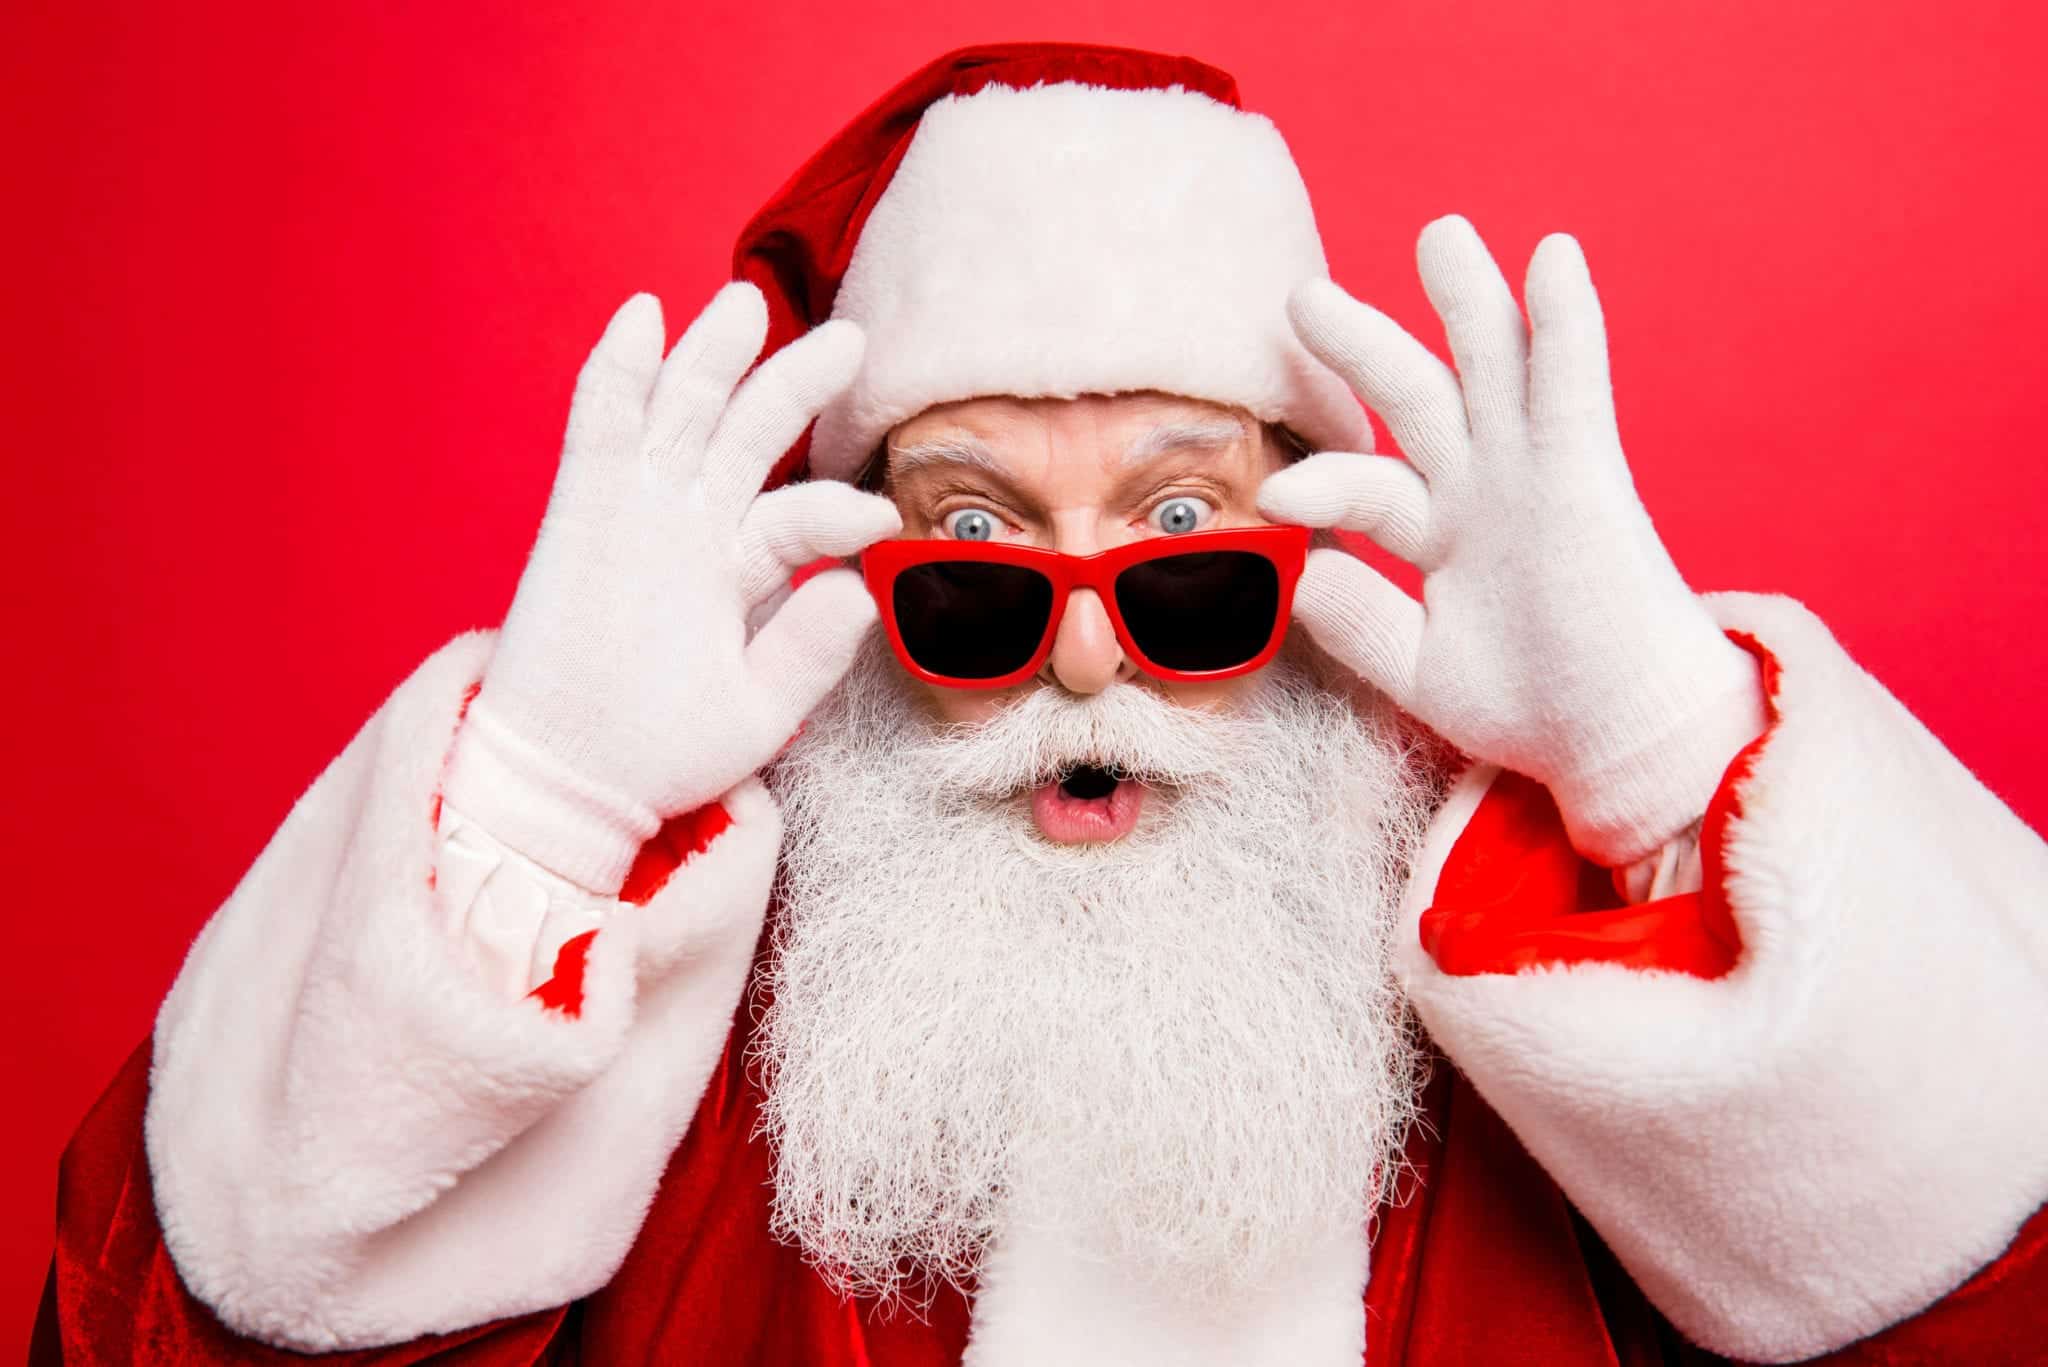 Registered Sex Offender Dressed as Santa – But What Was His Crime?